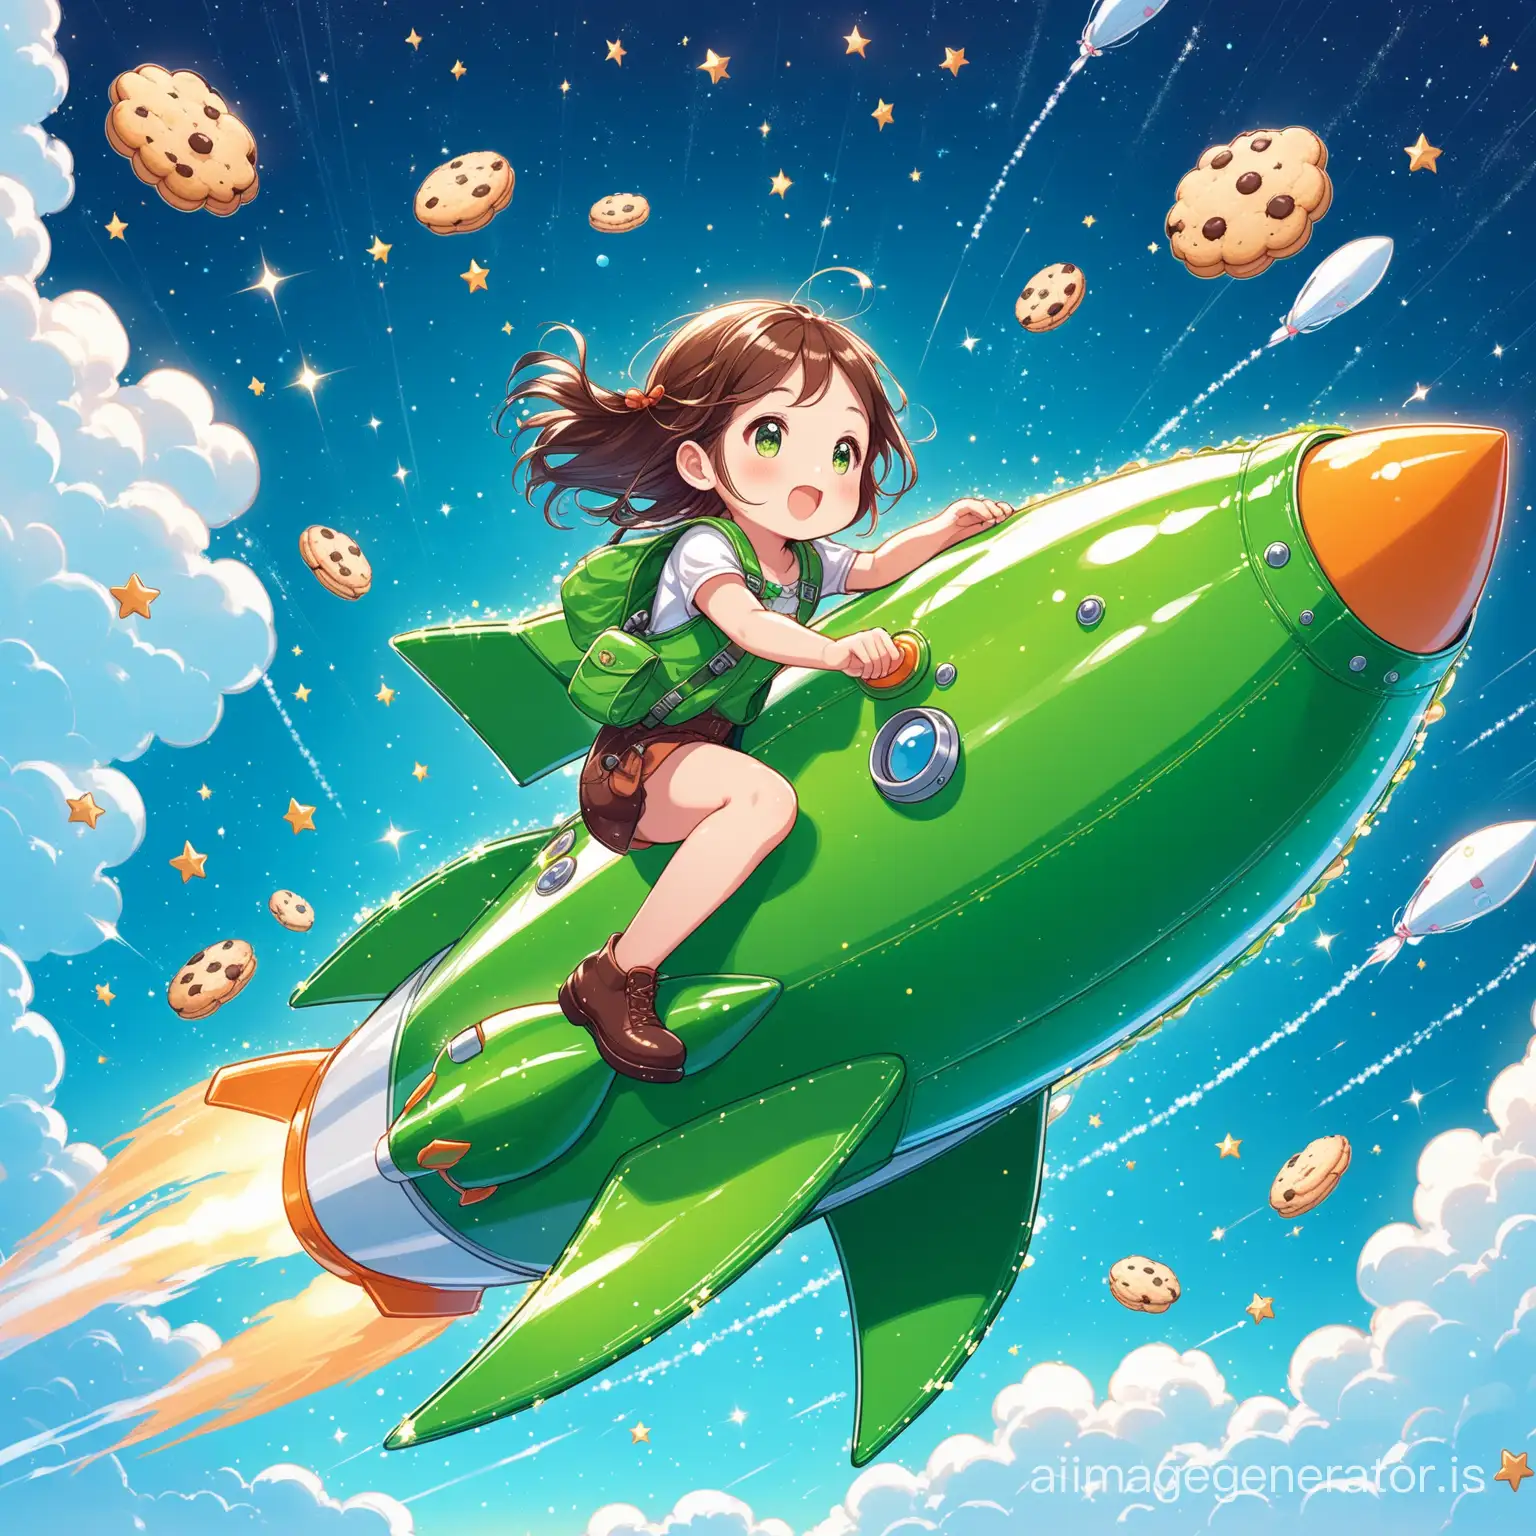 Adorable-Girl-Riding-Green-Rocket-Amid-Cookie-and-Bubble-Shower